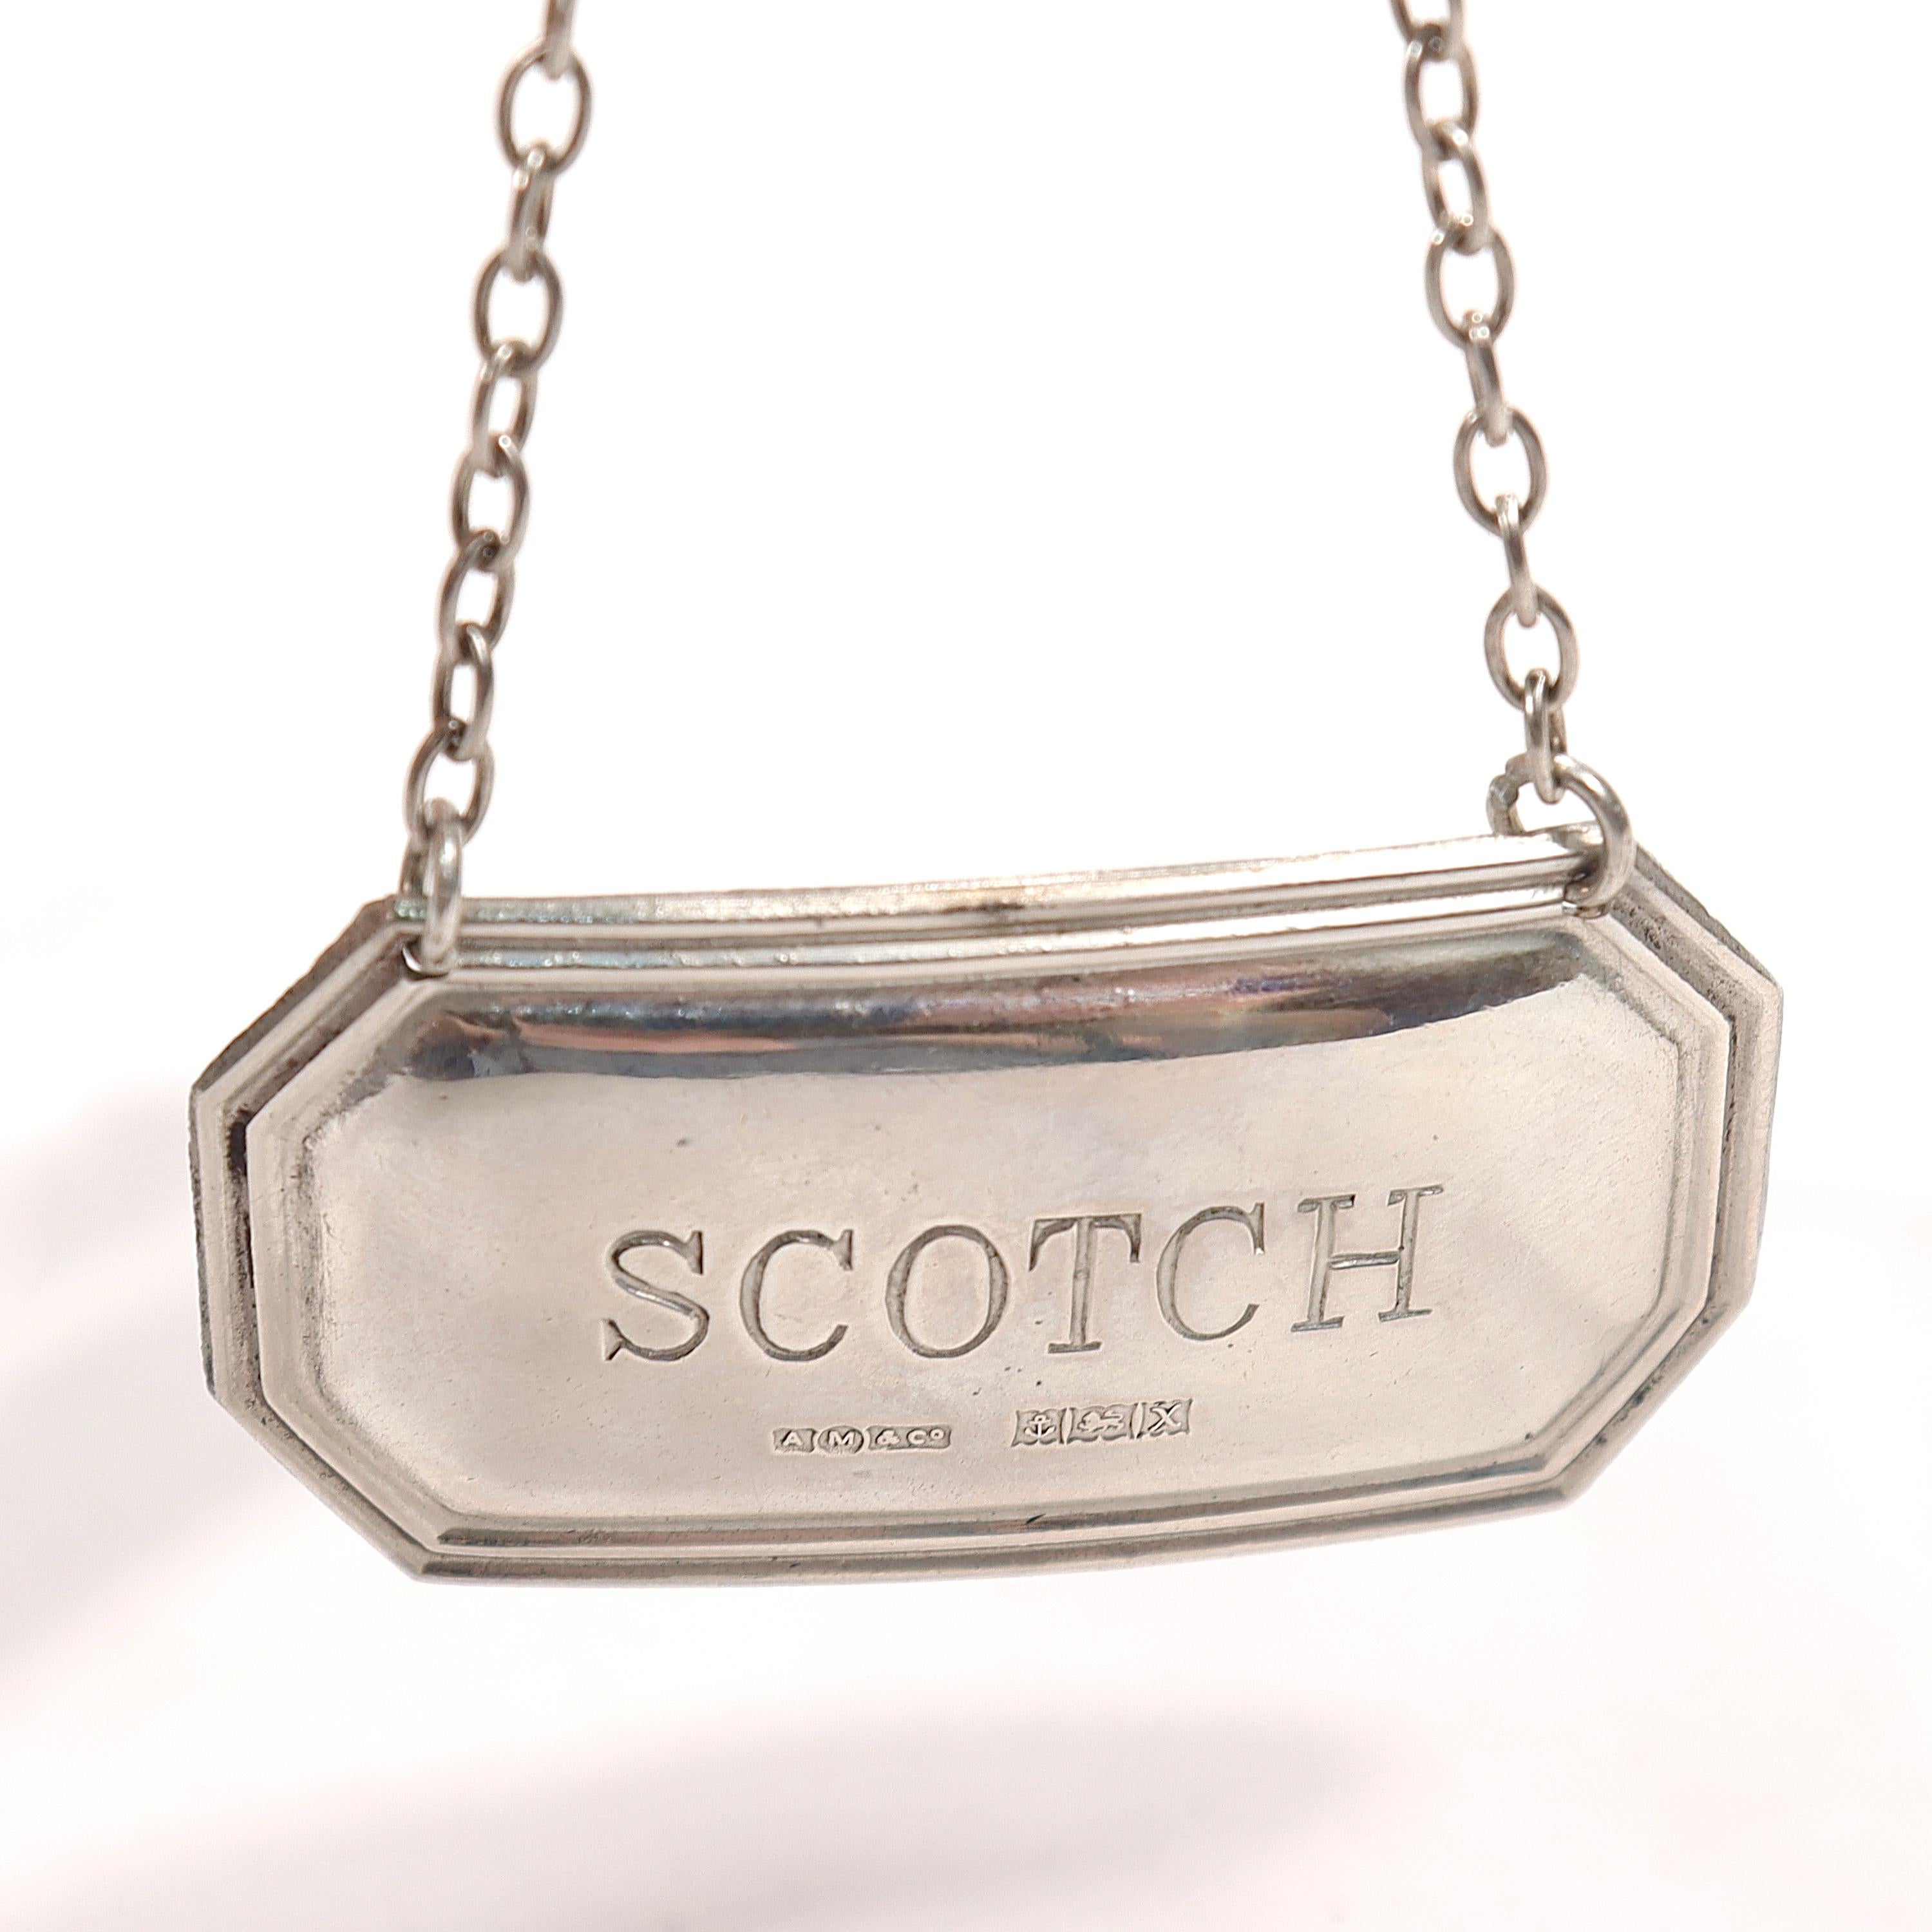 A fine vintage English scotch decanter or liquor label.

In sterling silver.

By A Marston & Co. 

The octagonal silver label hangs on a chain and reads: SCOTCH

Marked with English hallmarks for A. Marston & Co., Birmingham, Sterling, 1972.